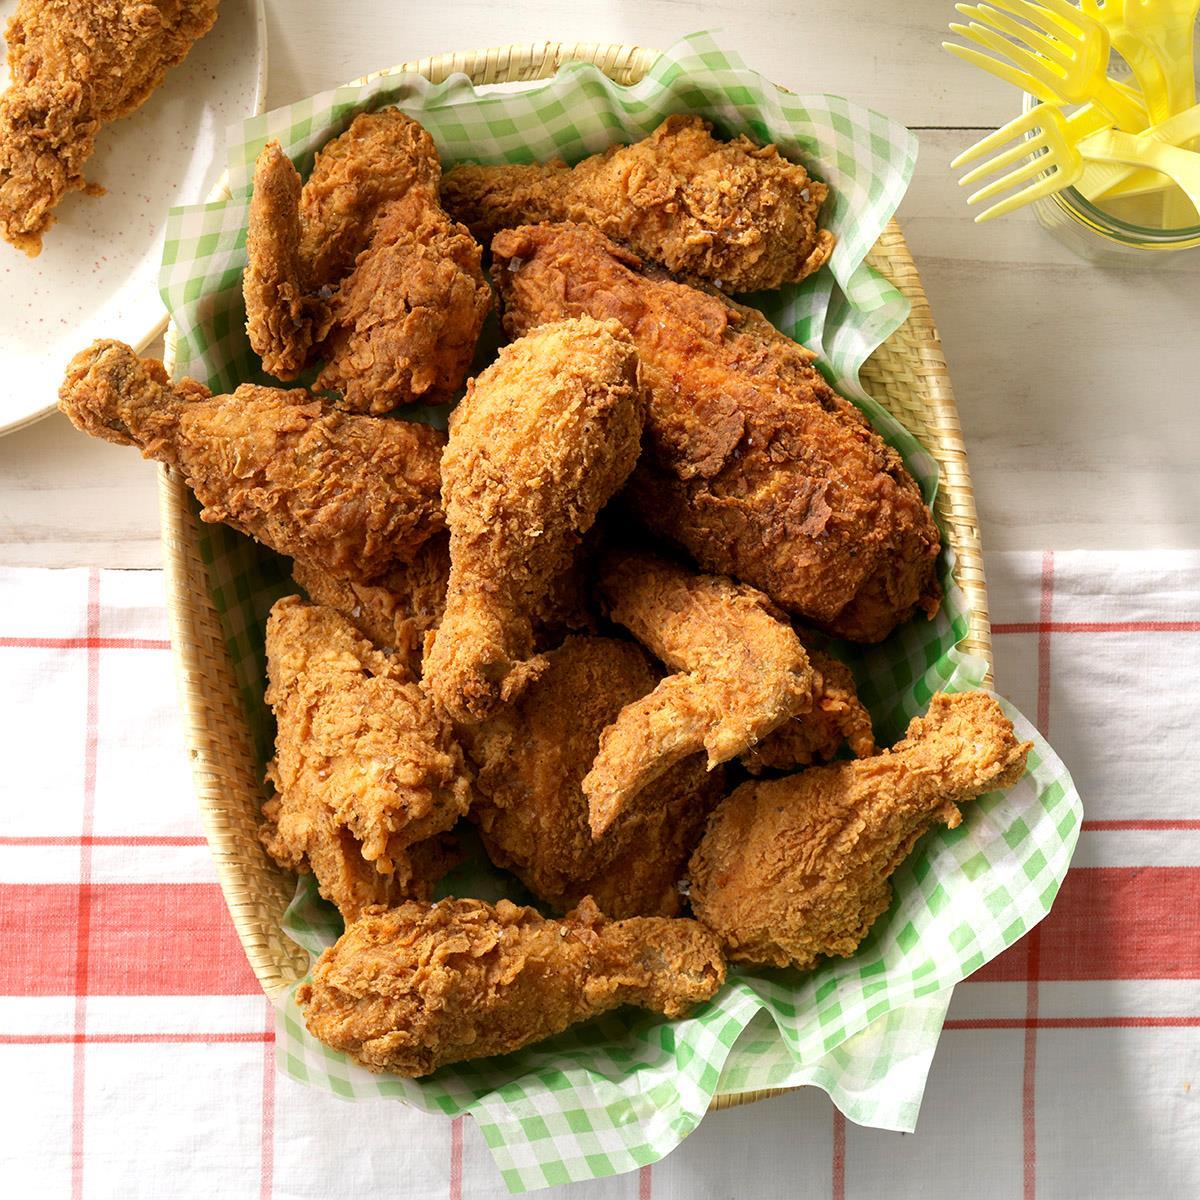 Best Fried Chicken Restaurants In Atlanta (With Takeout And 